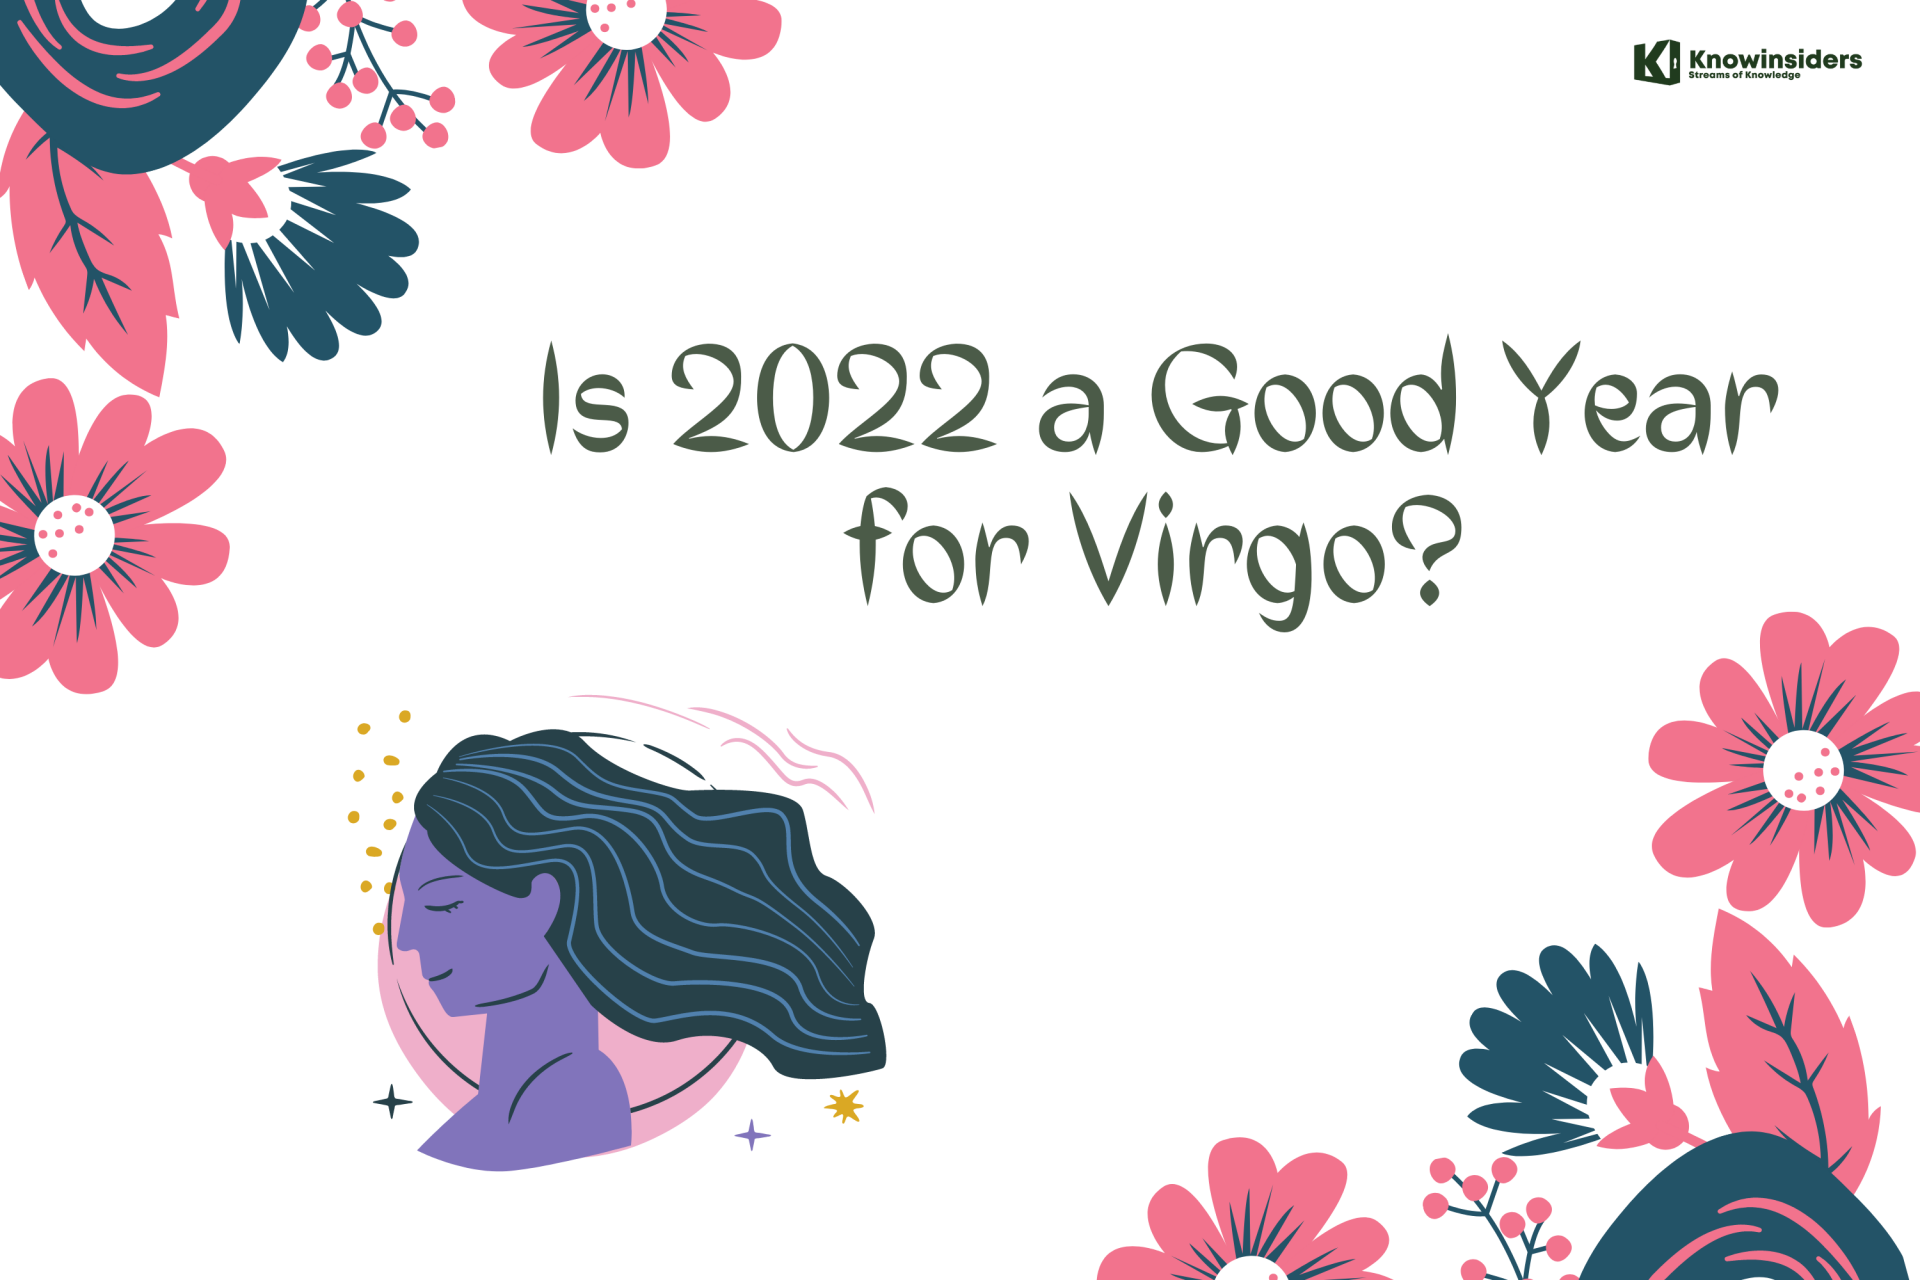 Is 2022 a Good Year for Virgo?